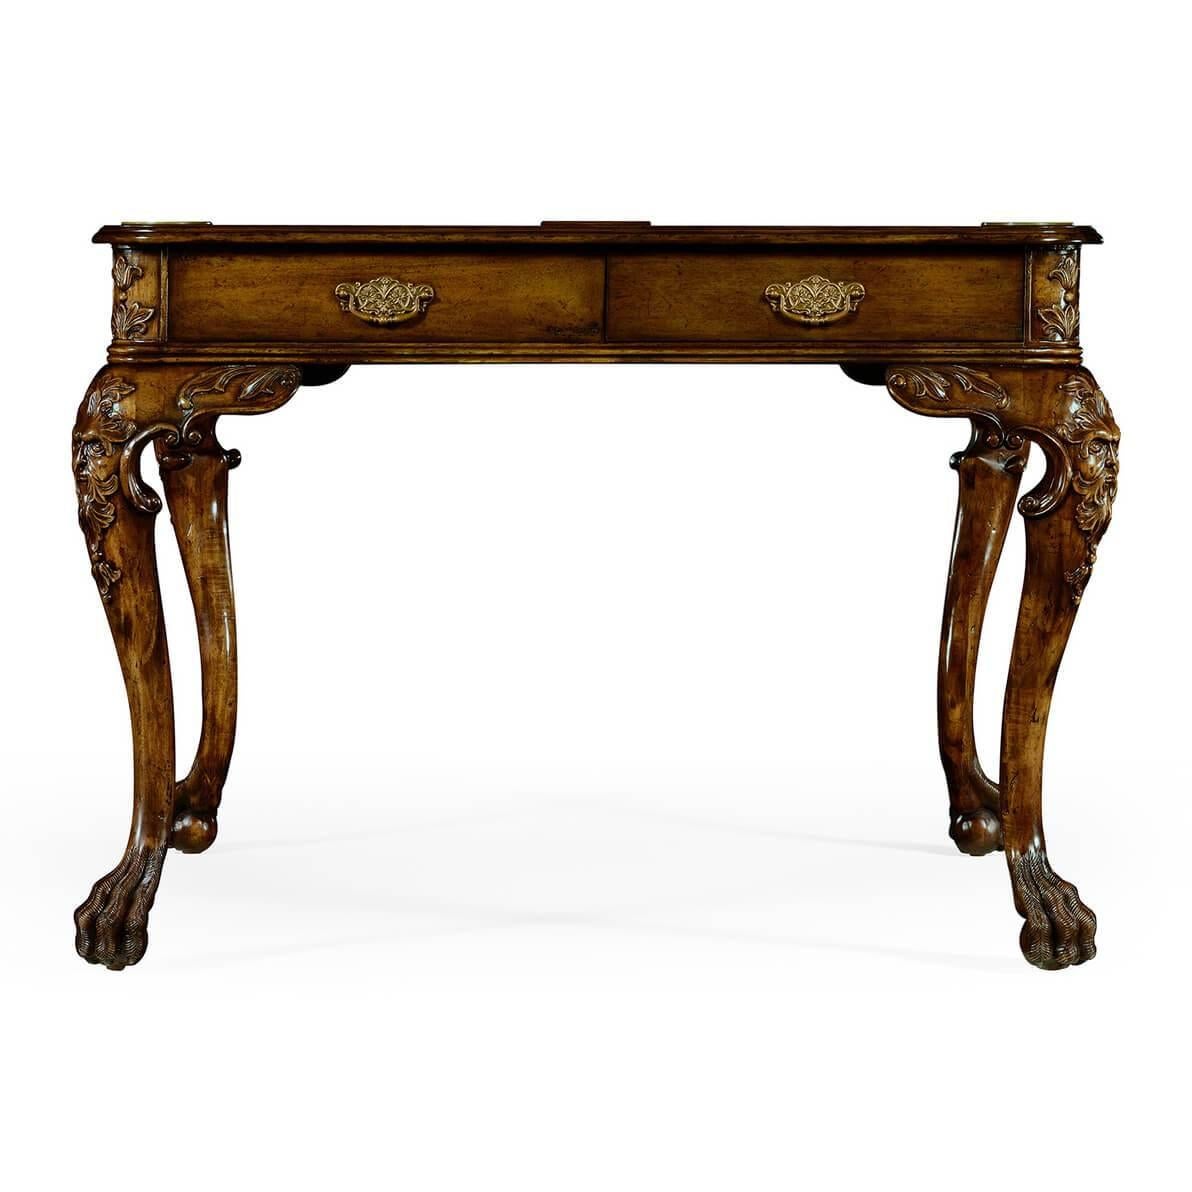 A substantial George II style square walnut card table with beautifully carved grotesque masks to the shoulders of the cabriole legs set on realistically carved lions paw feet. Inset tooled tan leather top with brass cup holders.

Dimensions: 44